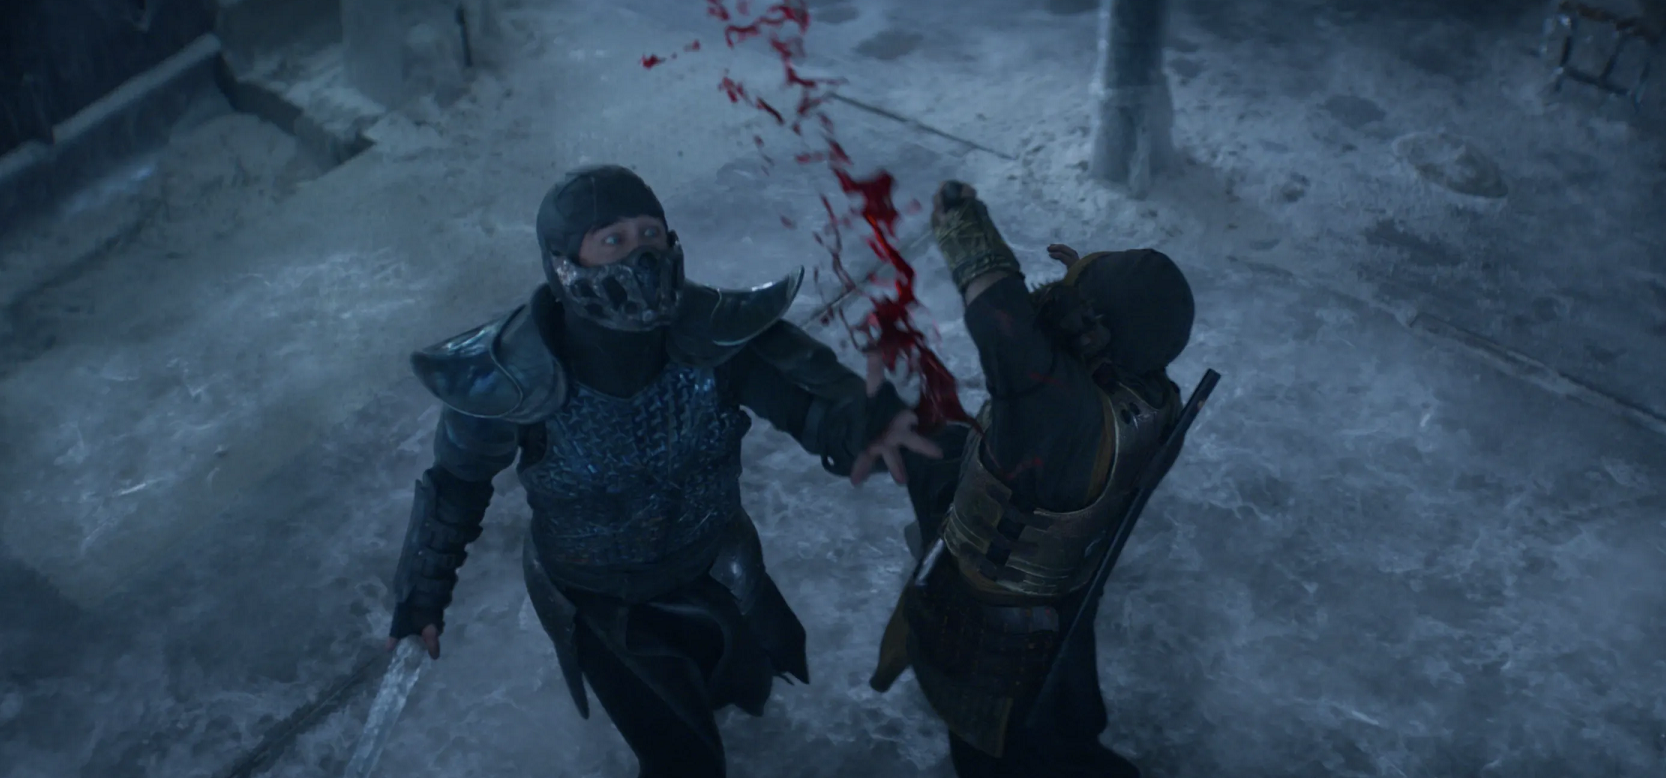 Mortal Kombat (2021) Review – The Point